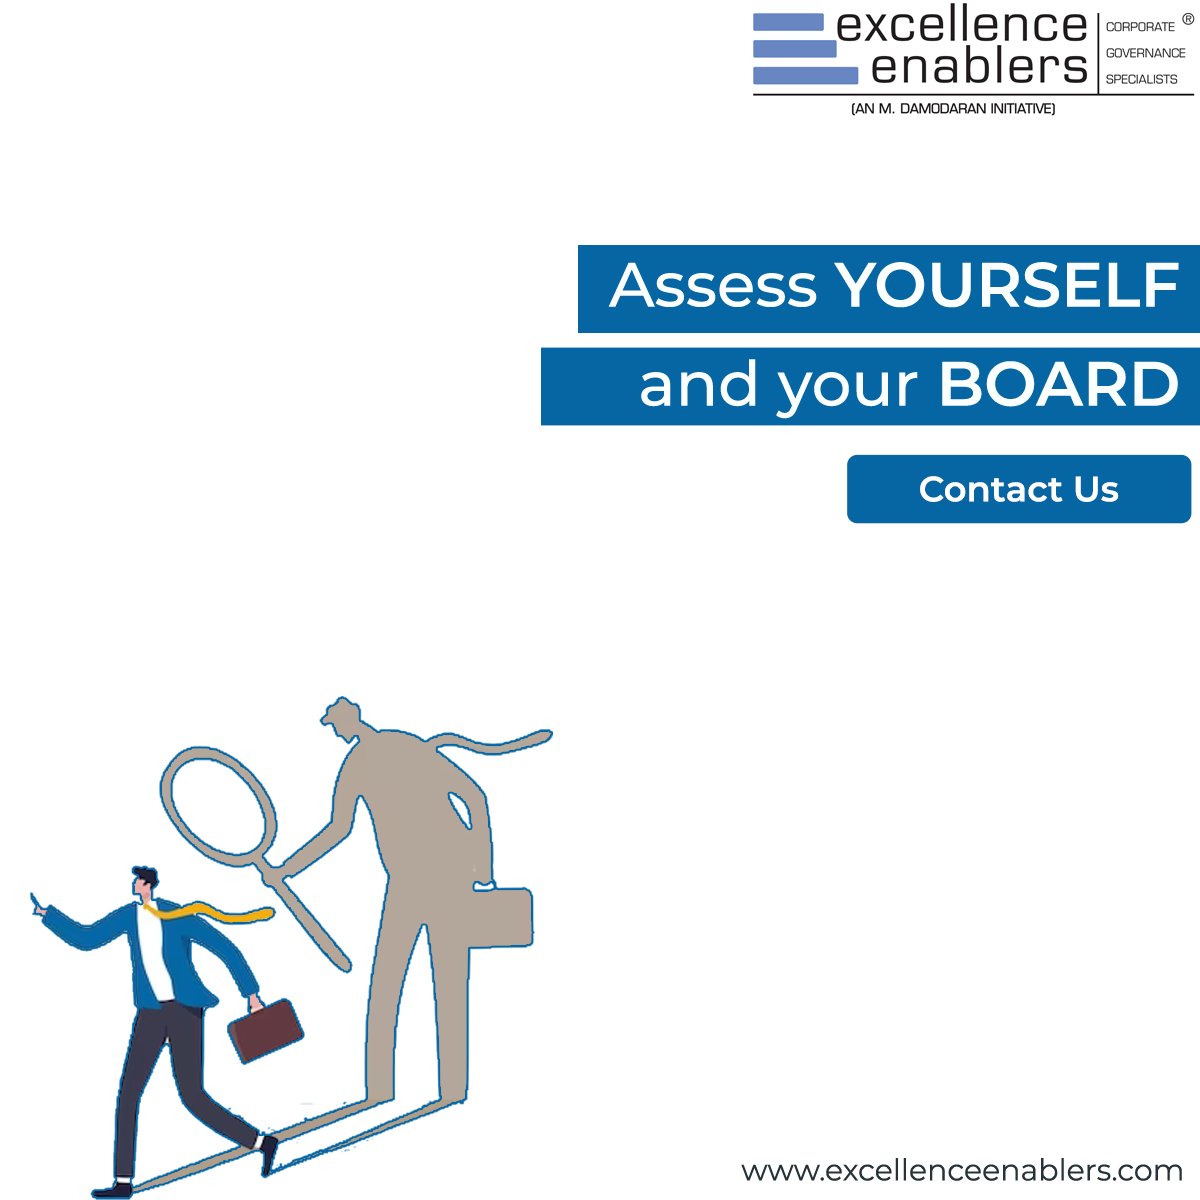 Evaluation must be a value-adding exercise, and not a tick the box event. Contact us.
Visit excellenceenablers.com or write to us at solutions@excellenceenablers.in
#ExcellenceEnablers #corporategovernance #boardconsultancy #boardeffectiveness #boardevaluation #boardassessment